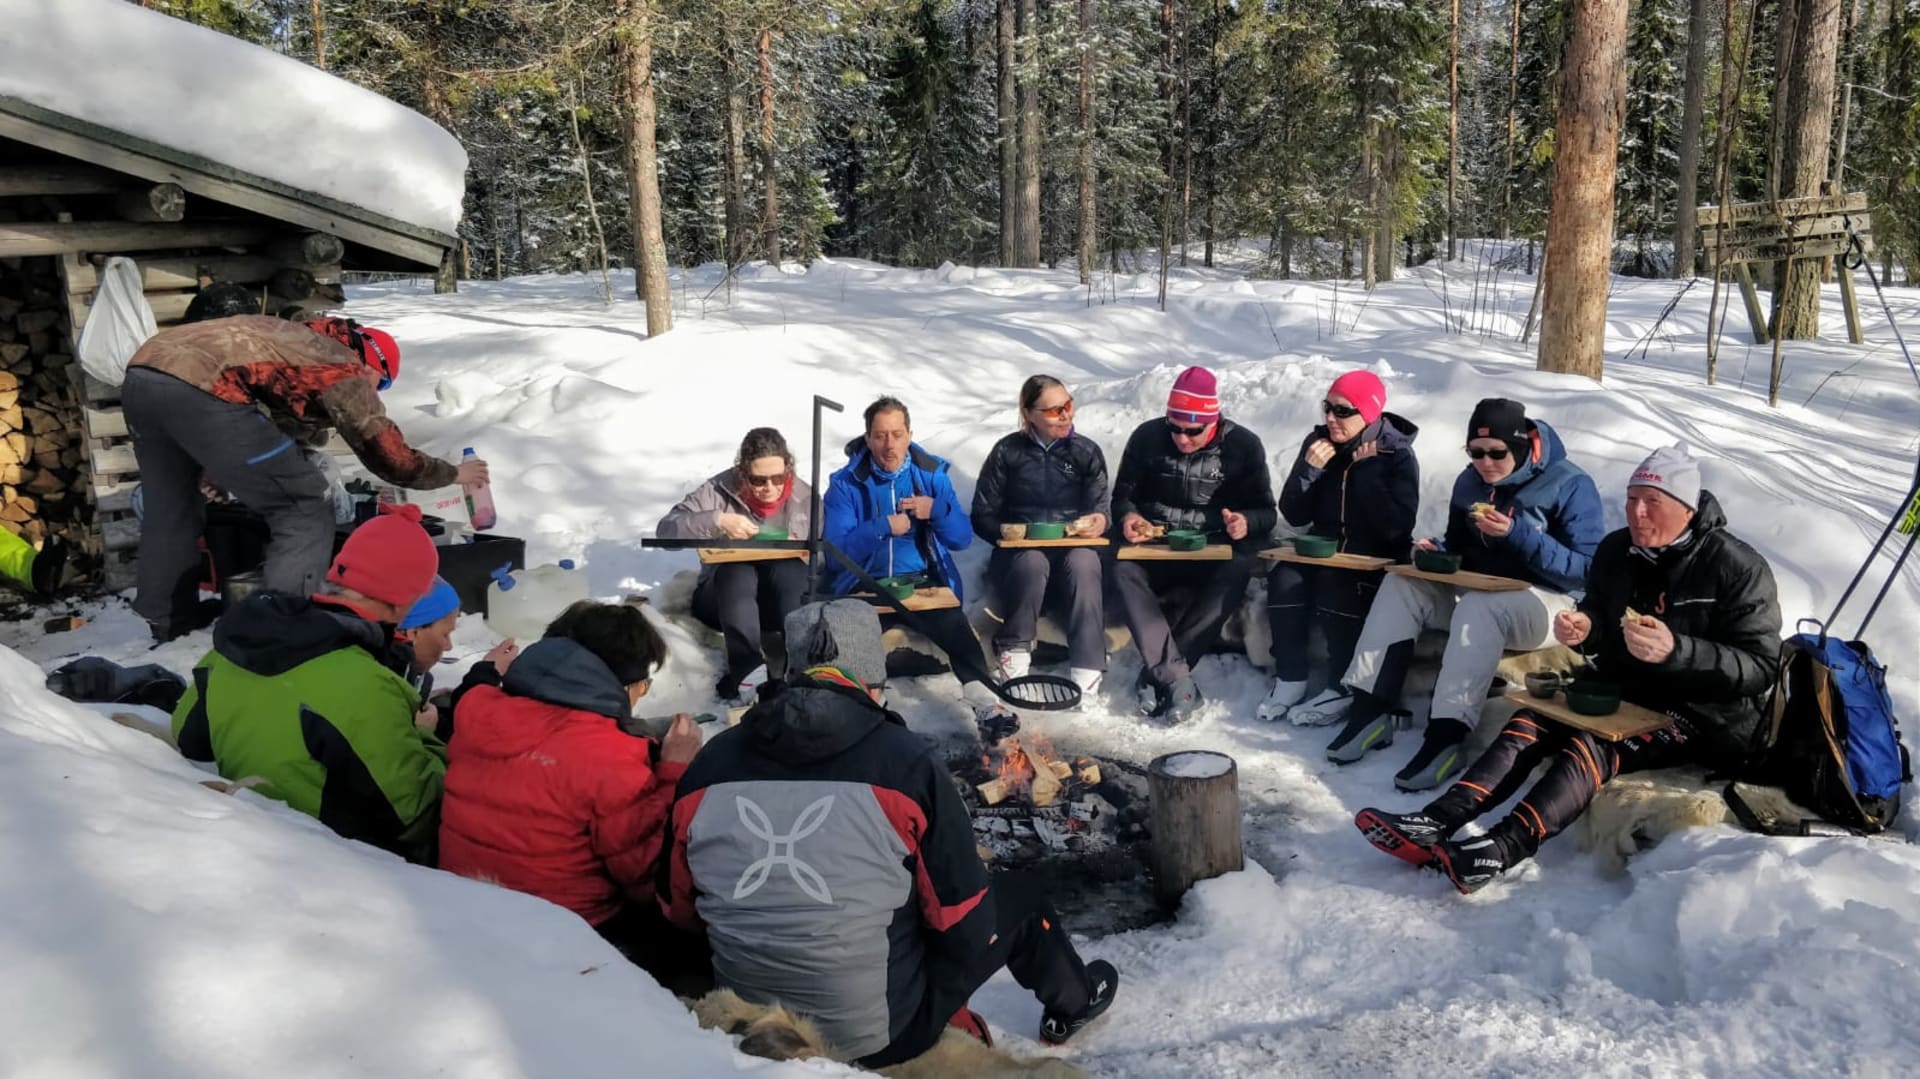 A group around a fire place having lunch